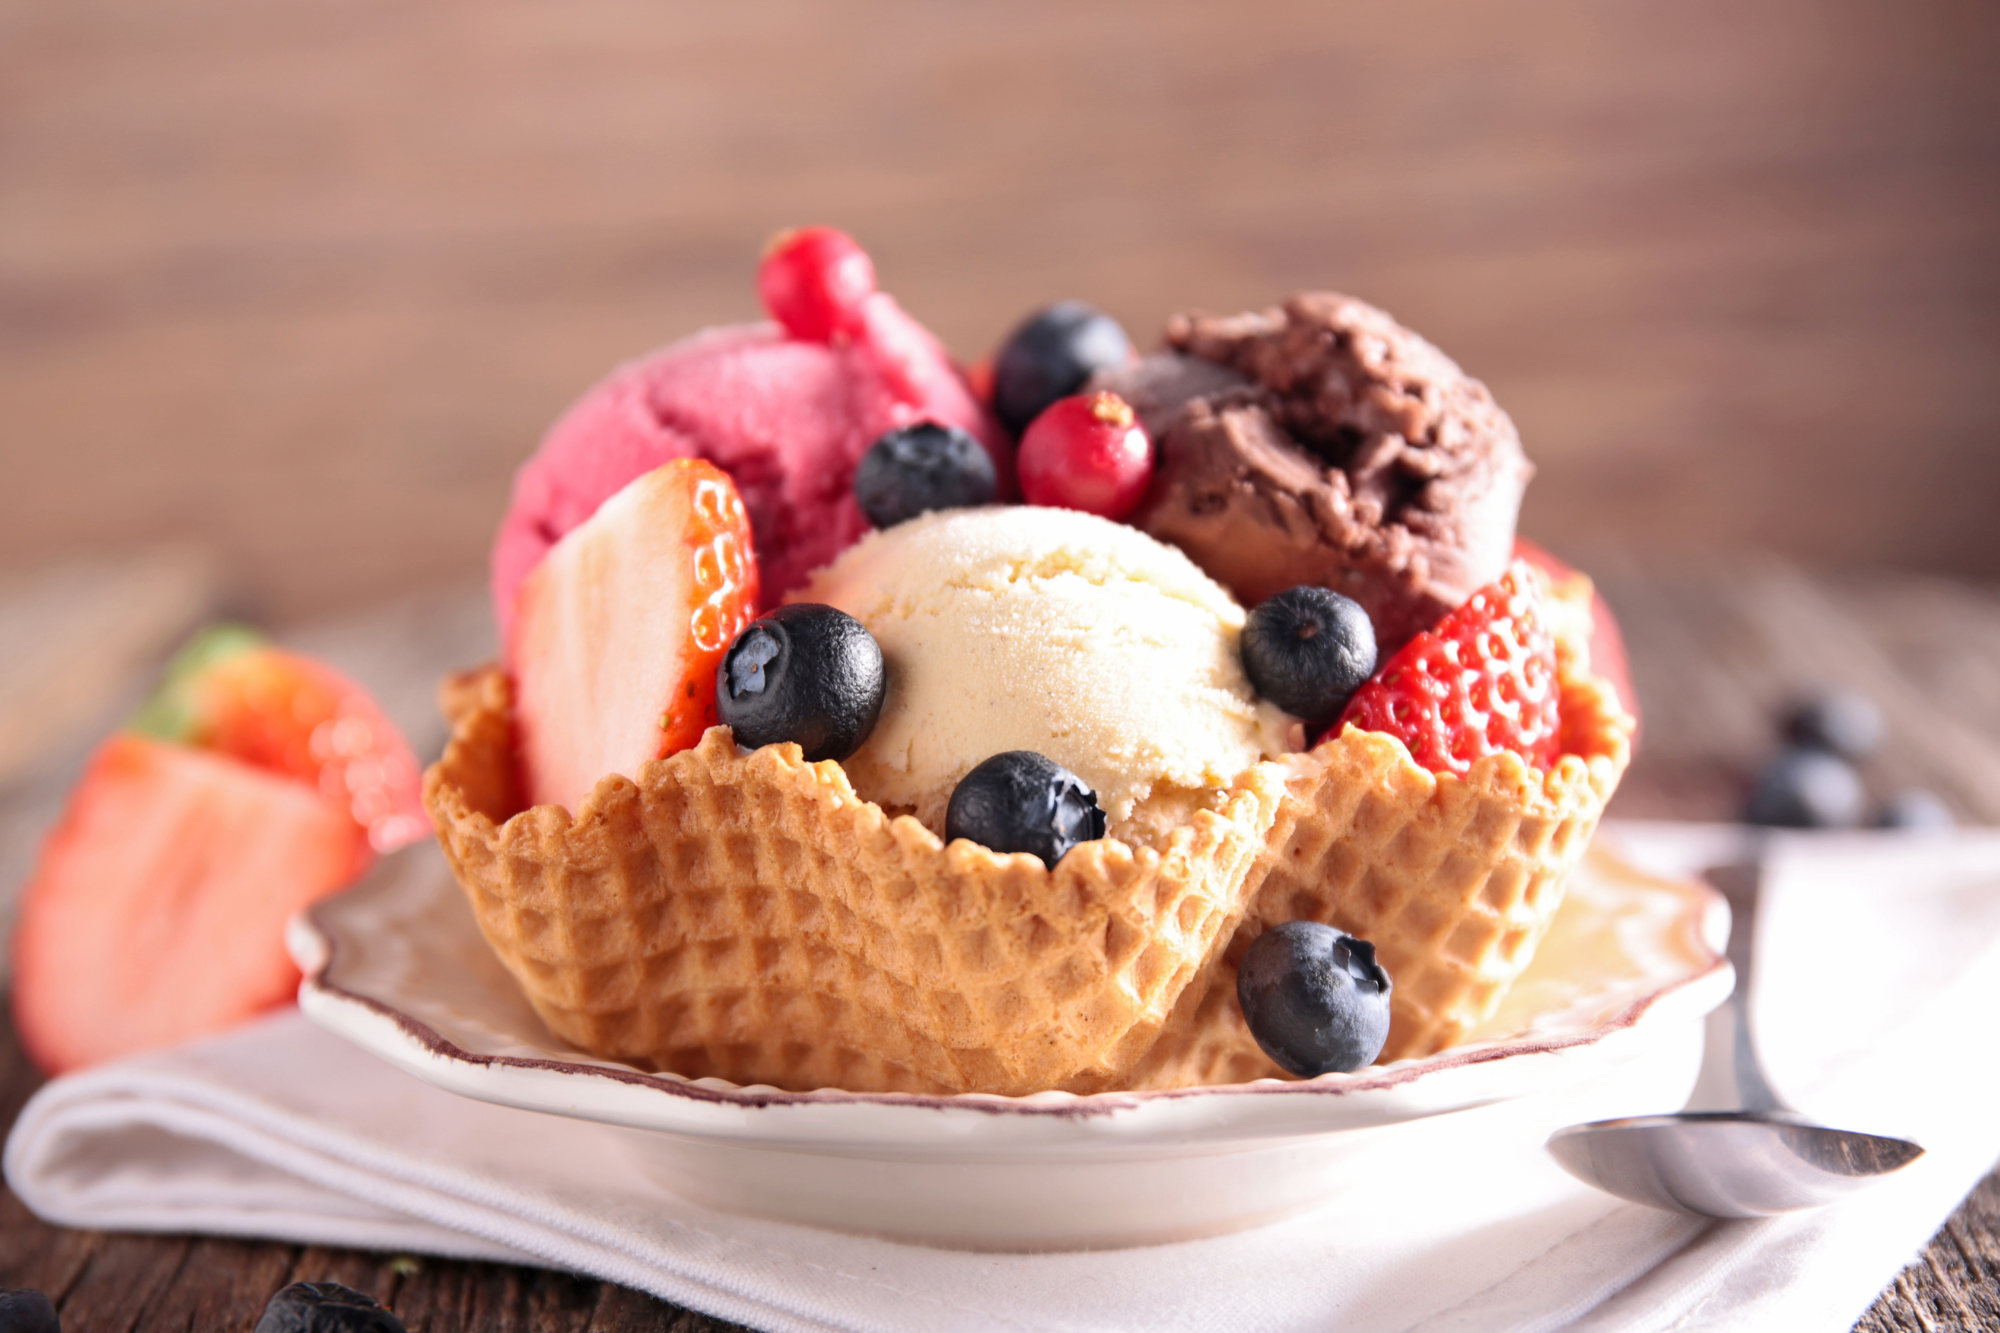 Top 4 Cold Treat Shops for Cooling Off in Albany, Oregon